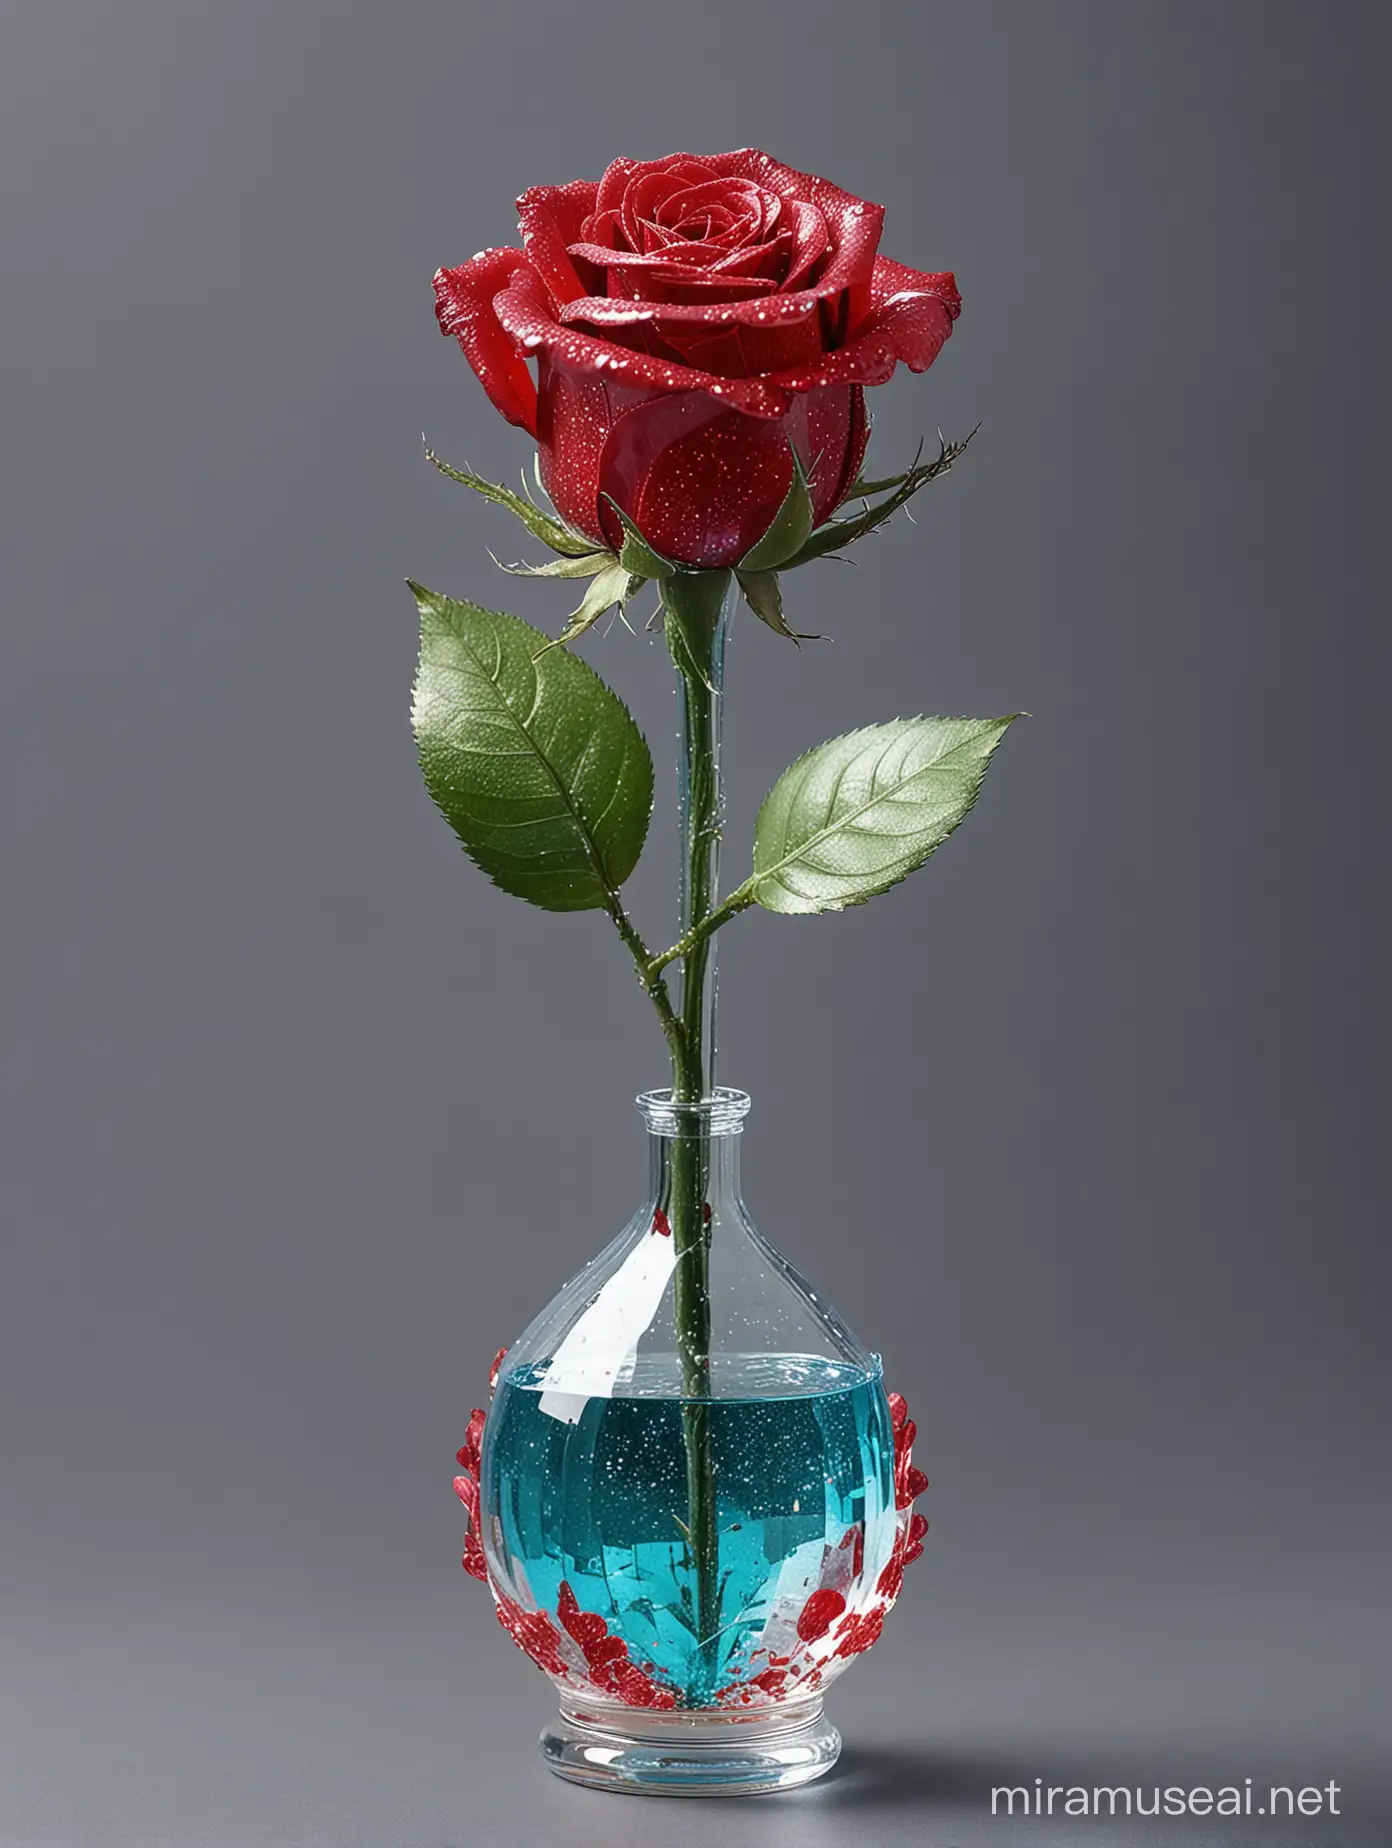 A rose of red transparent crystal glitters,
Its leaves are slightly turquoise colored but transparent, the stem is bluish and transparent. The rose is in a crystal vase with water in it.